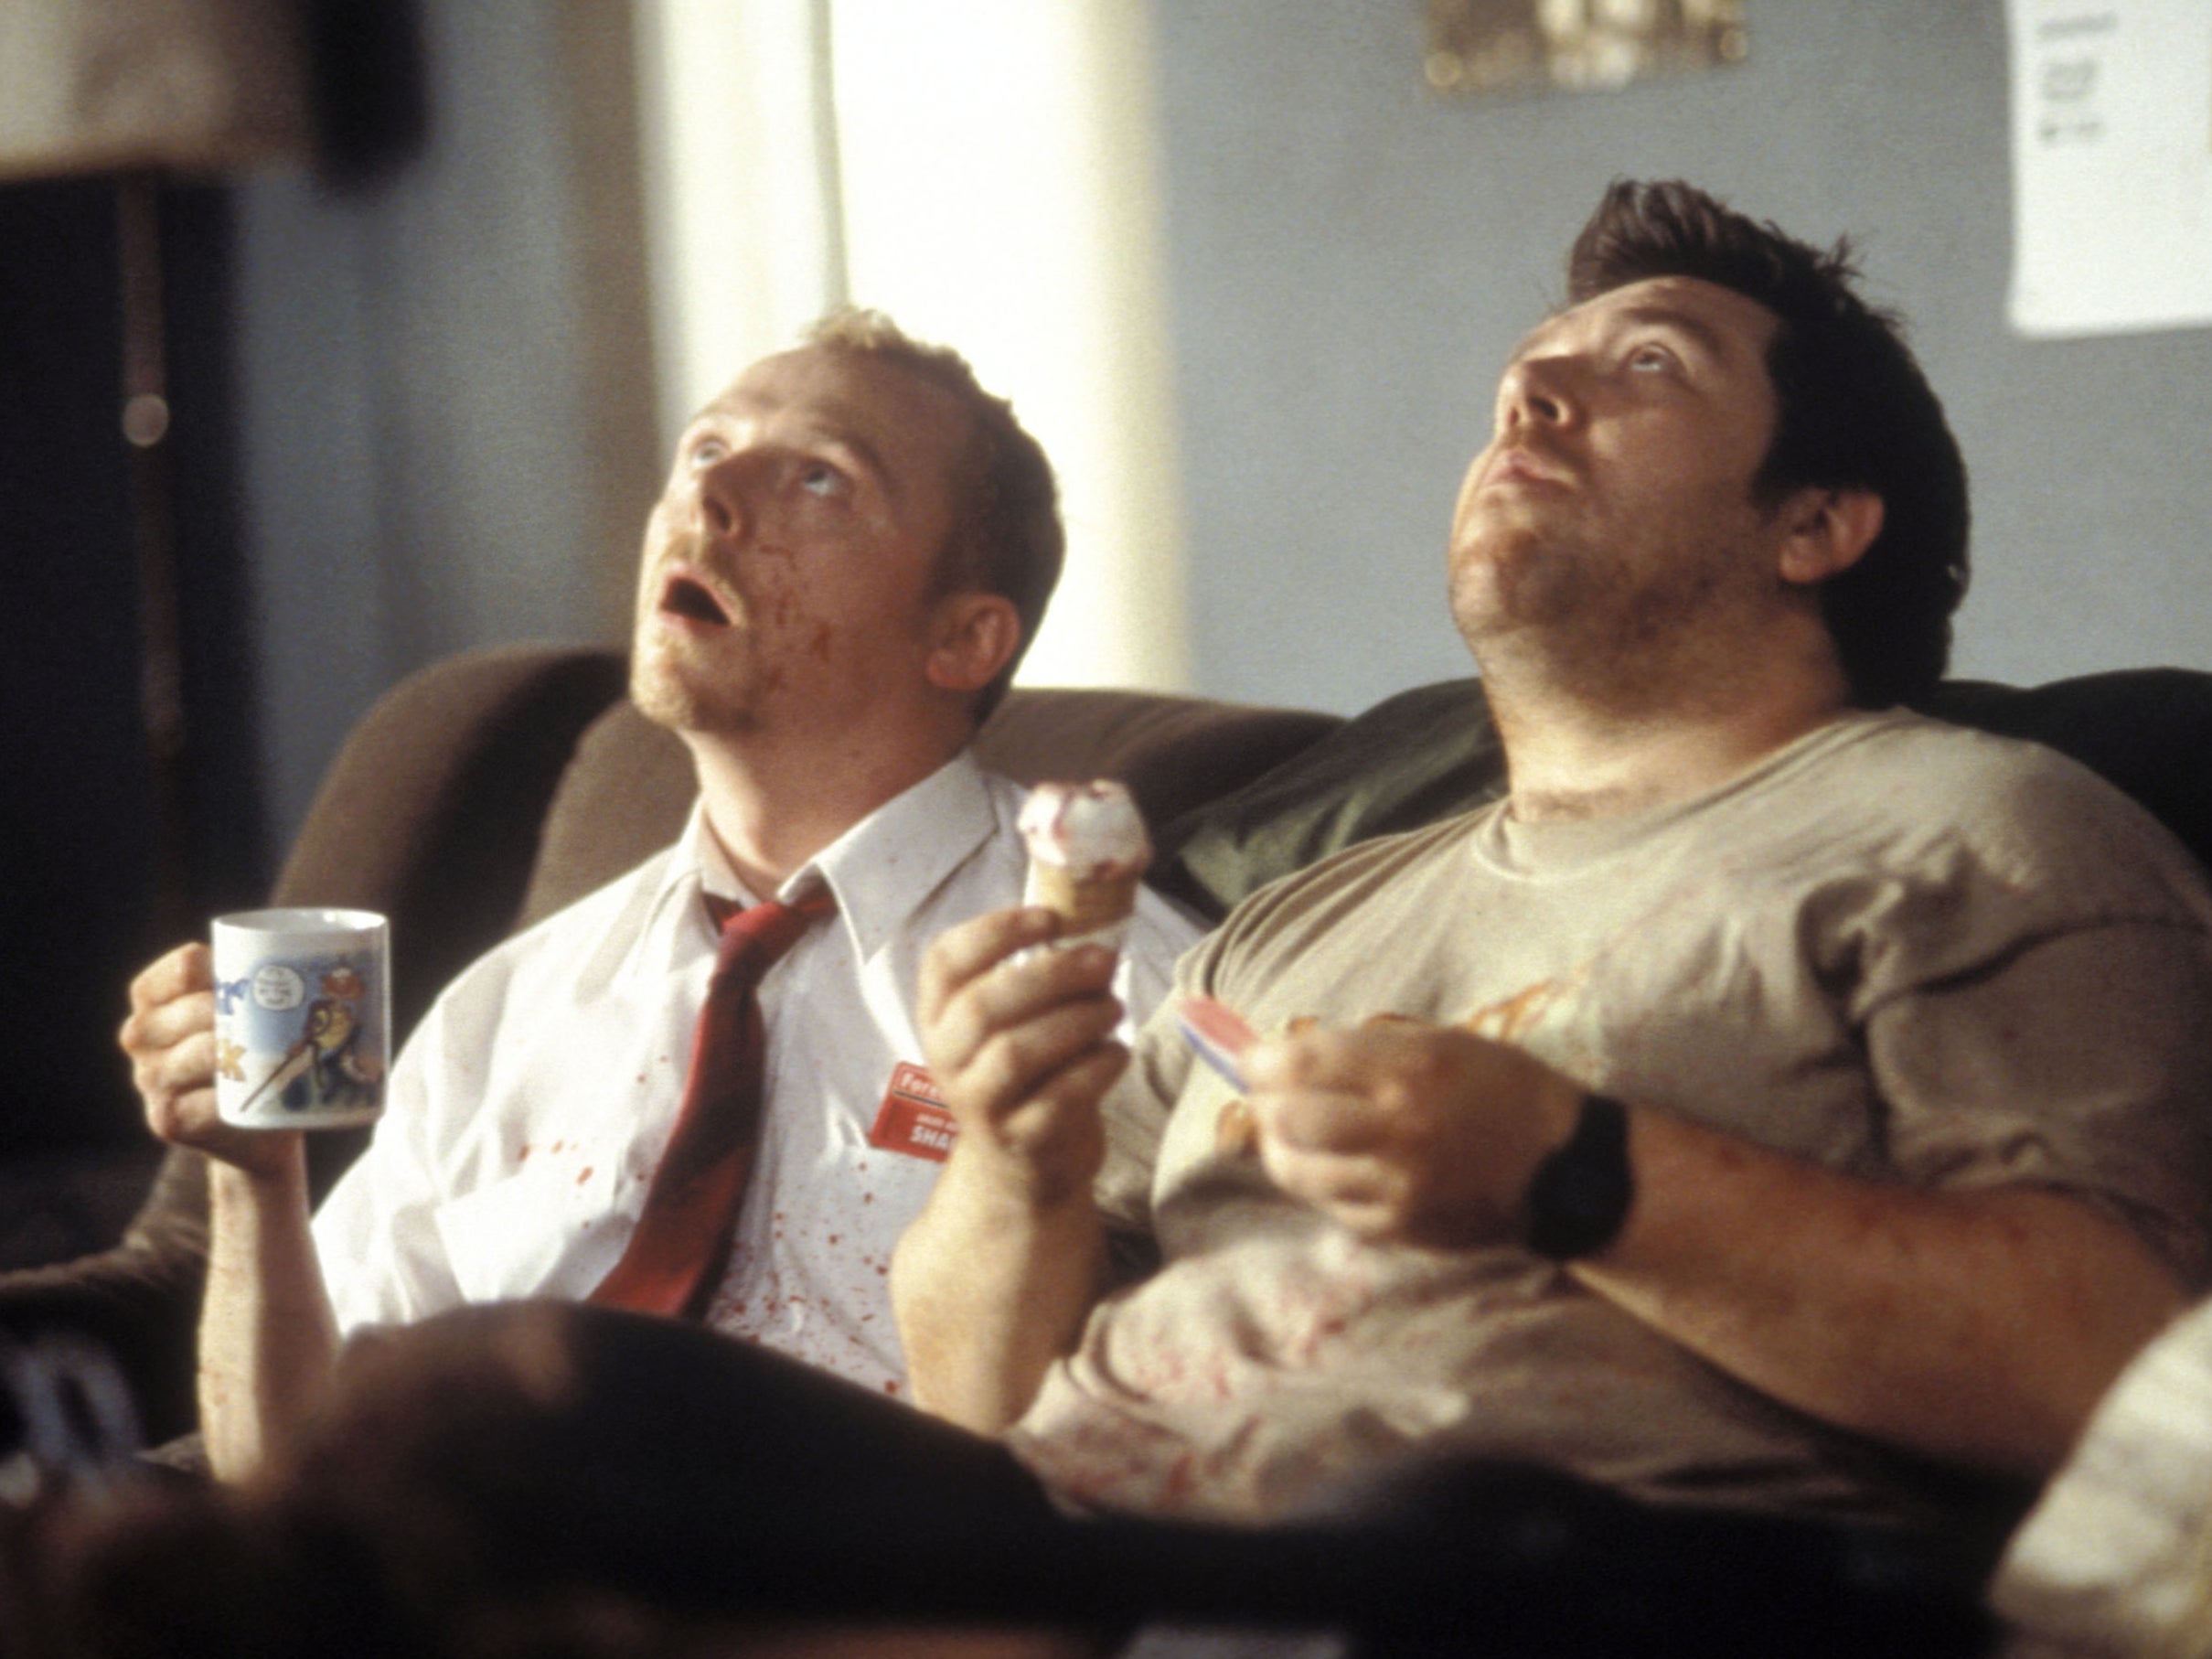 Simon Pegg and Nick Frost in ‘Shaun of the Dead’ (2004)